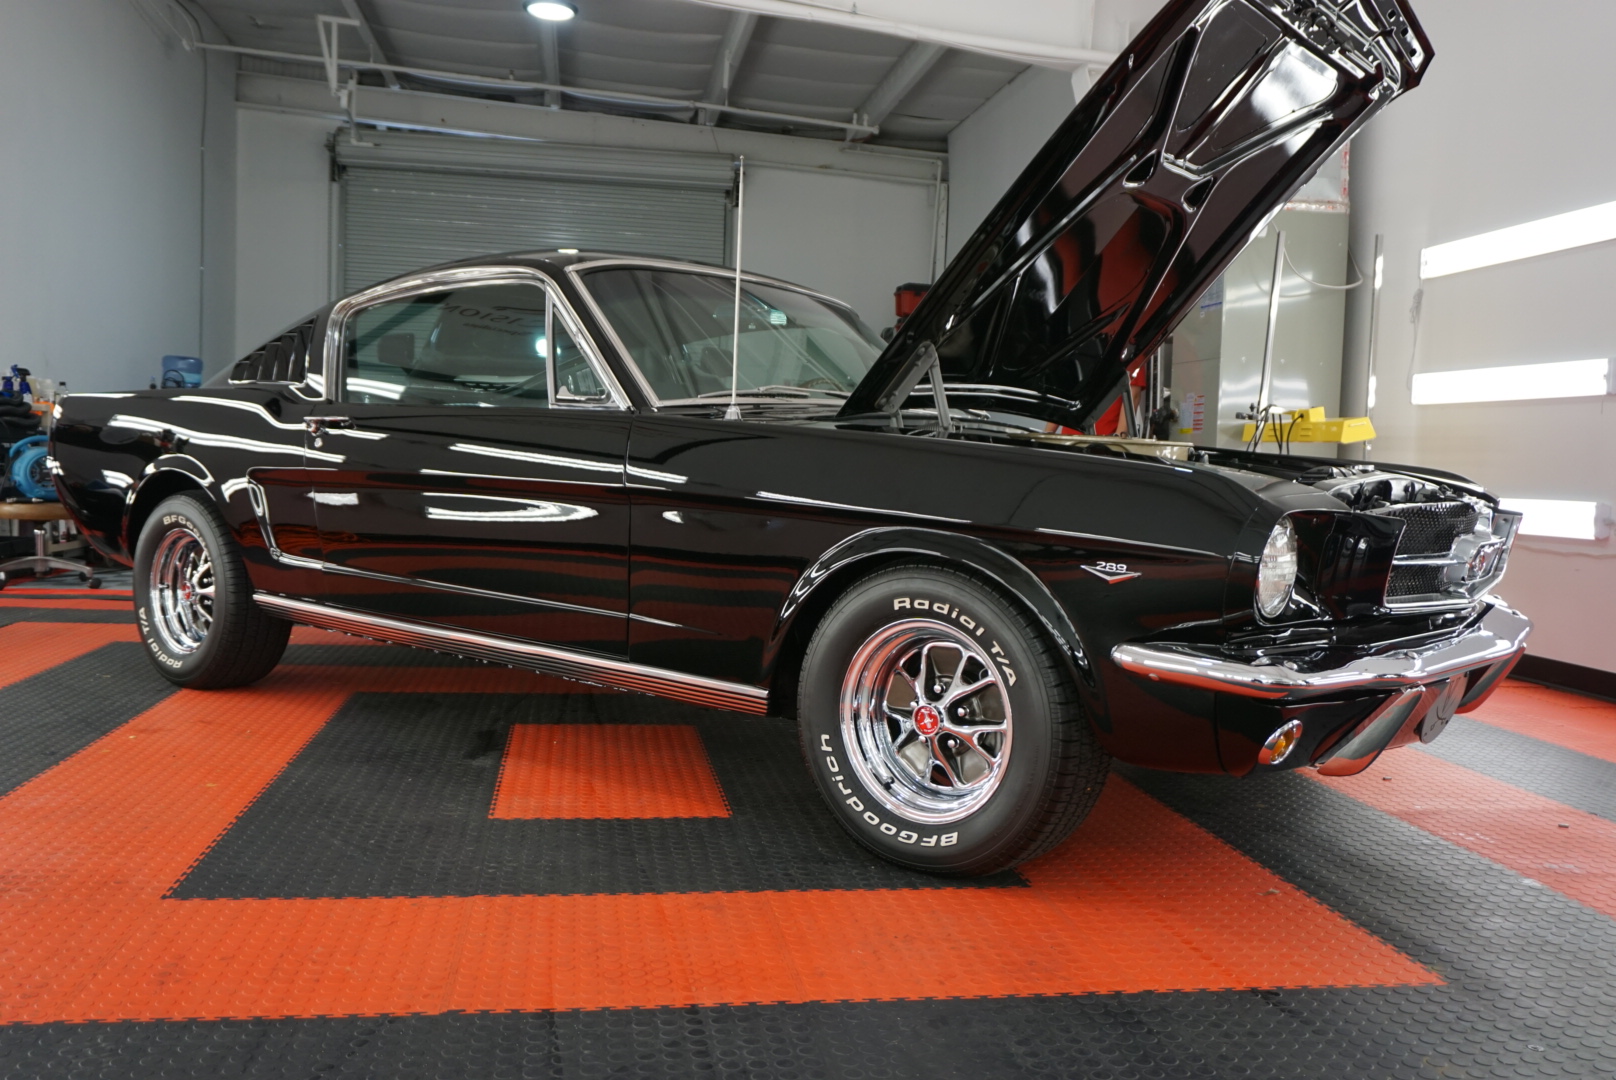 Photo of a Ceramic Coating of a 1965 Ford Mustang